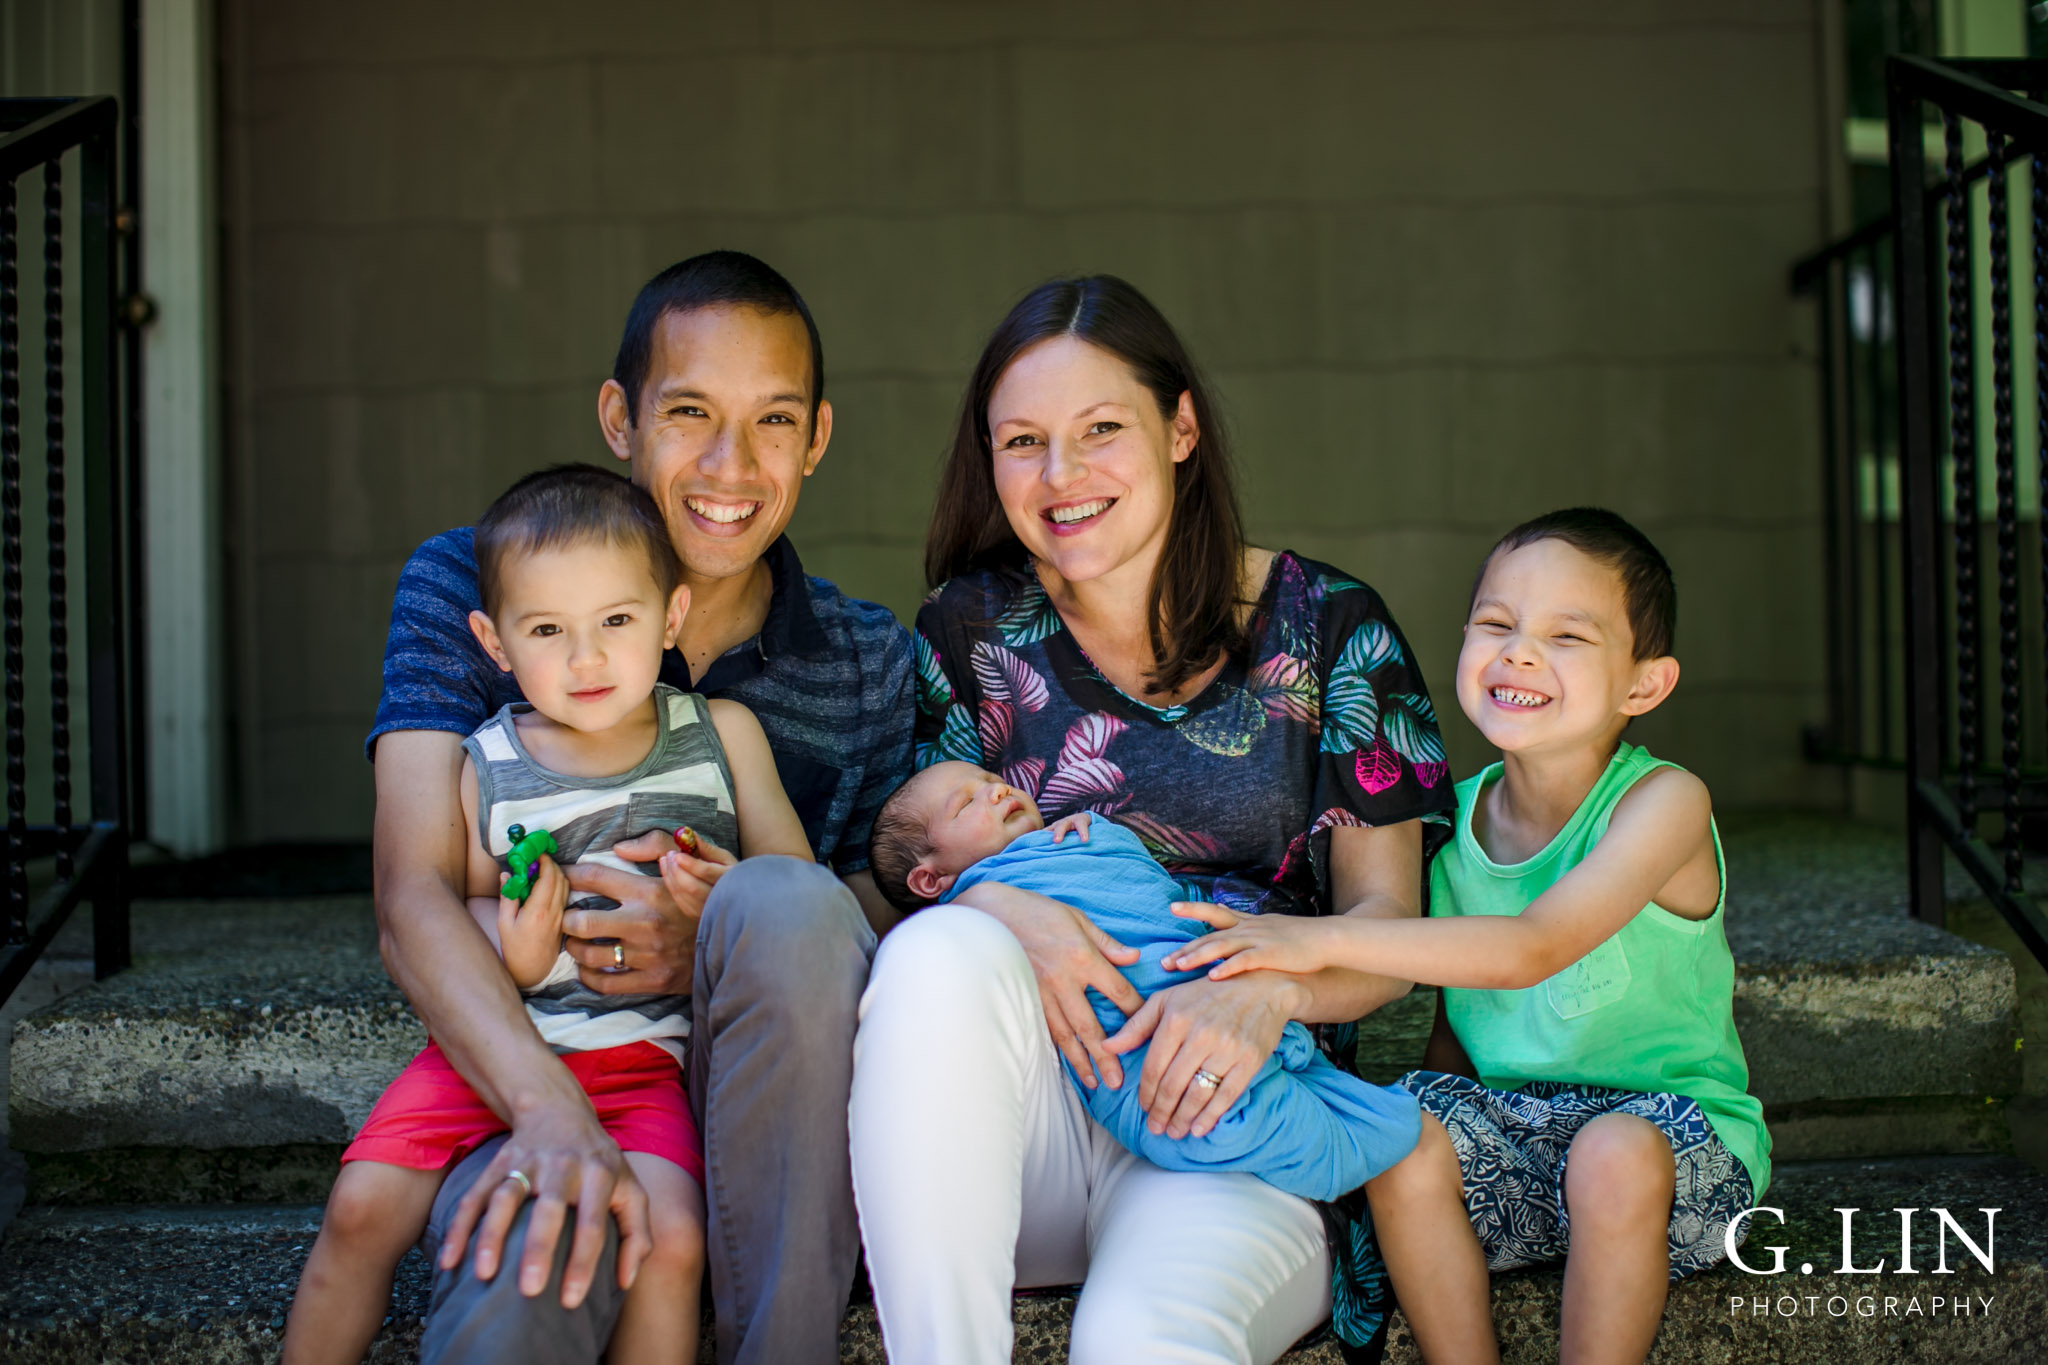 Raleigh Family Photographer | G. Lin Photography | Family outside of home and smiling